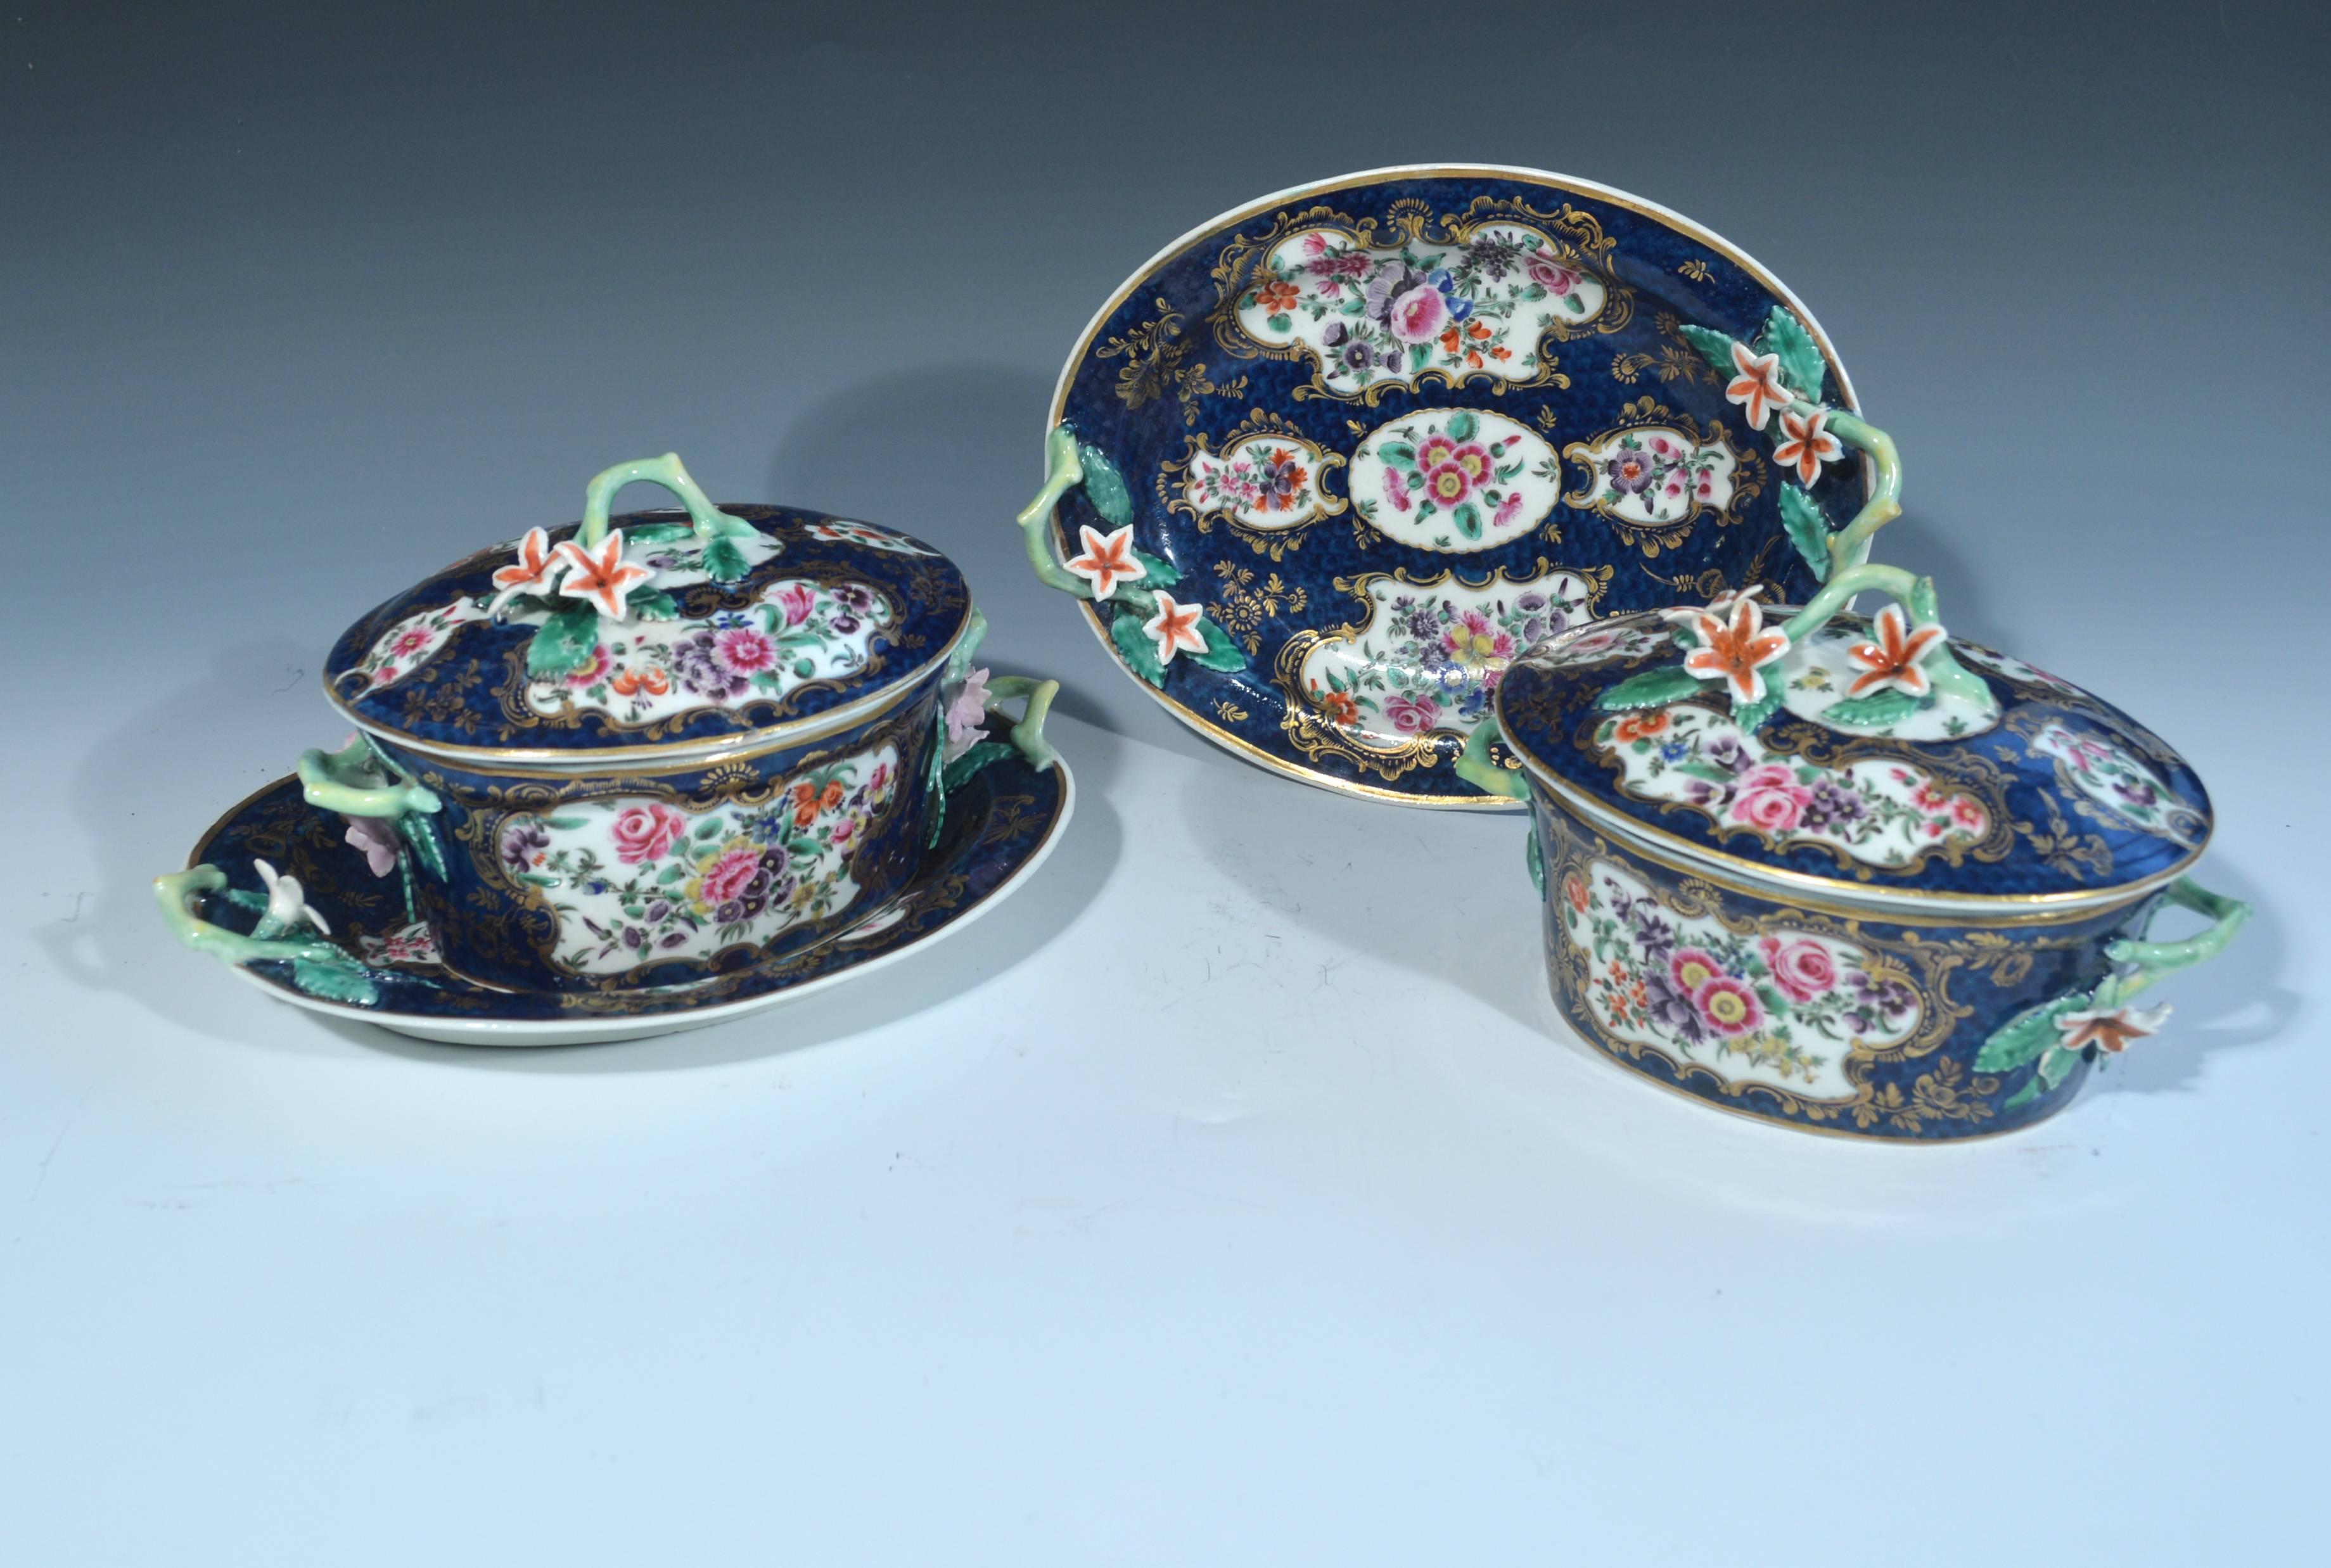 First period Worcester porcelain Mazarine blue scale botanical sauce tureens covers and stands, circa 1765-1775.

The outstanding botanical oval sauce tureens, covers and stands with a blue scale ground are highlighted with panels of flowers and